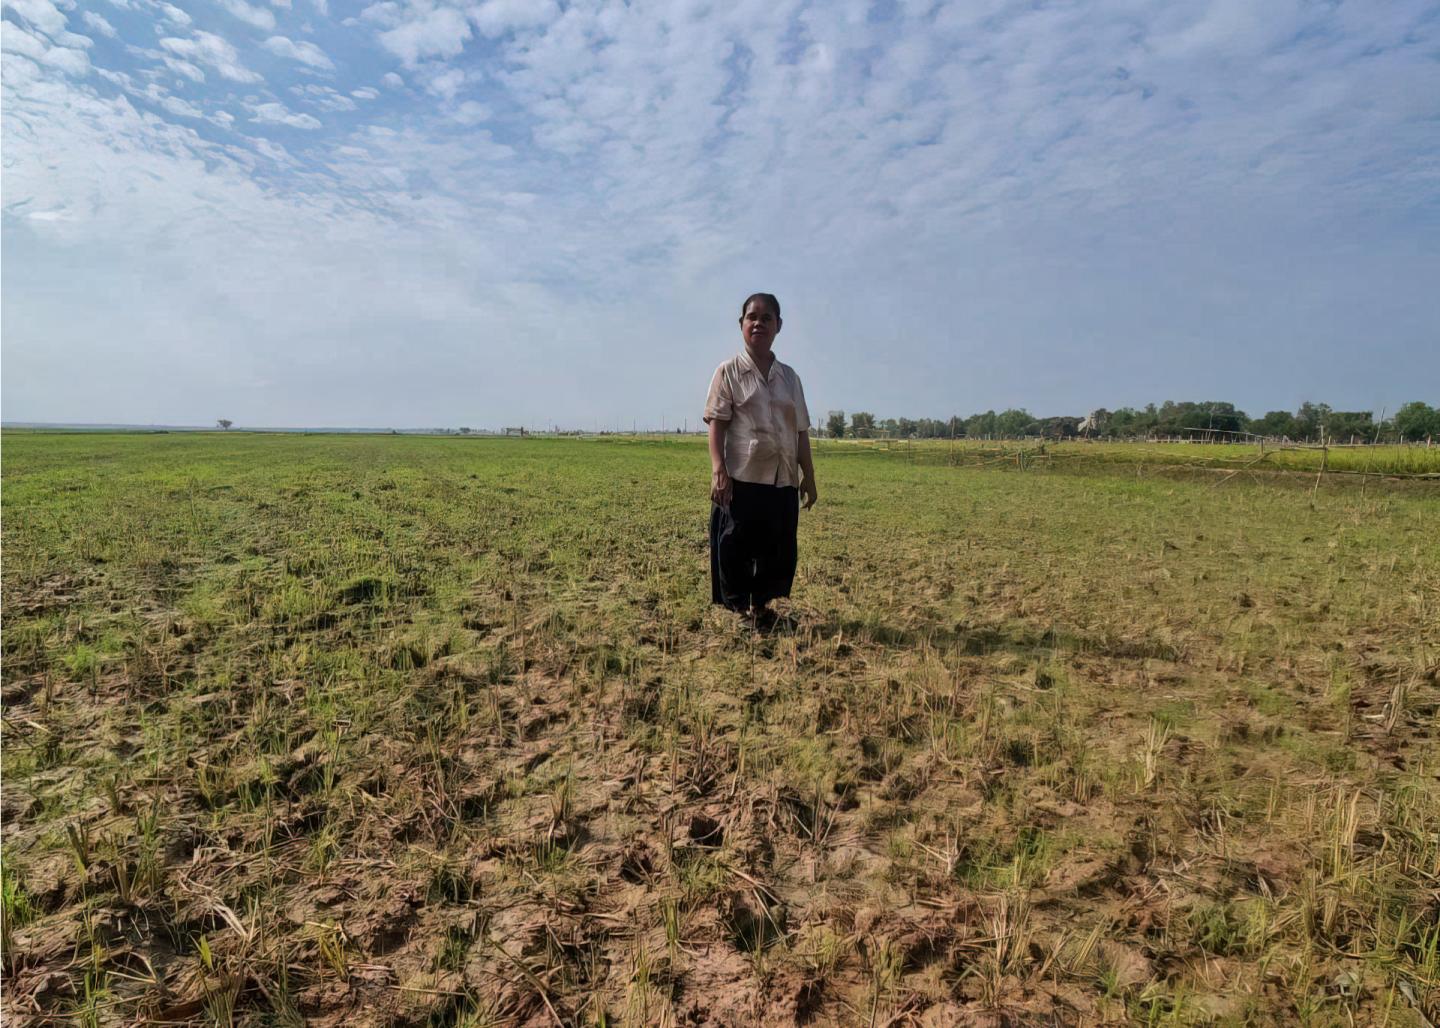 A Cambodian woman stands in the middle of a green field.